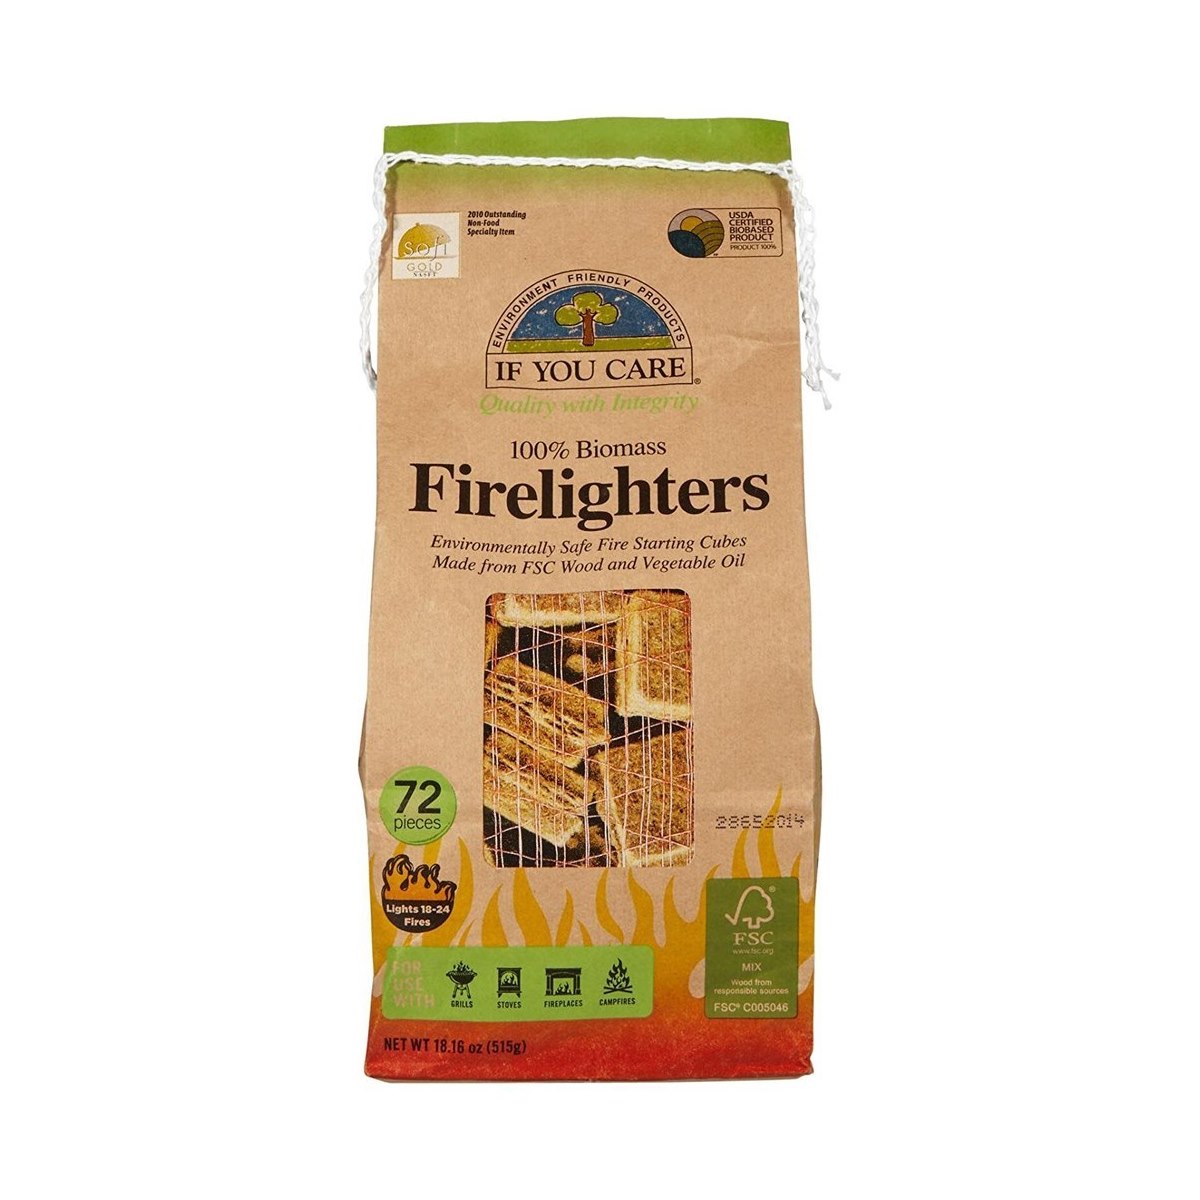 If You Care Firelighters Pack of 72